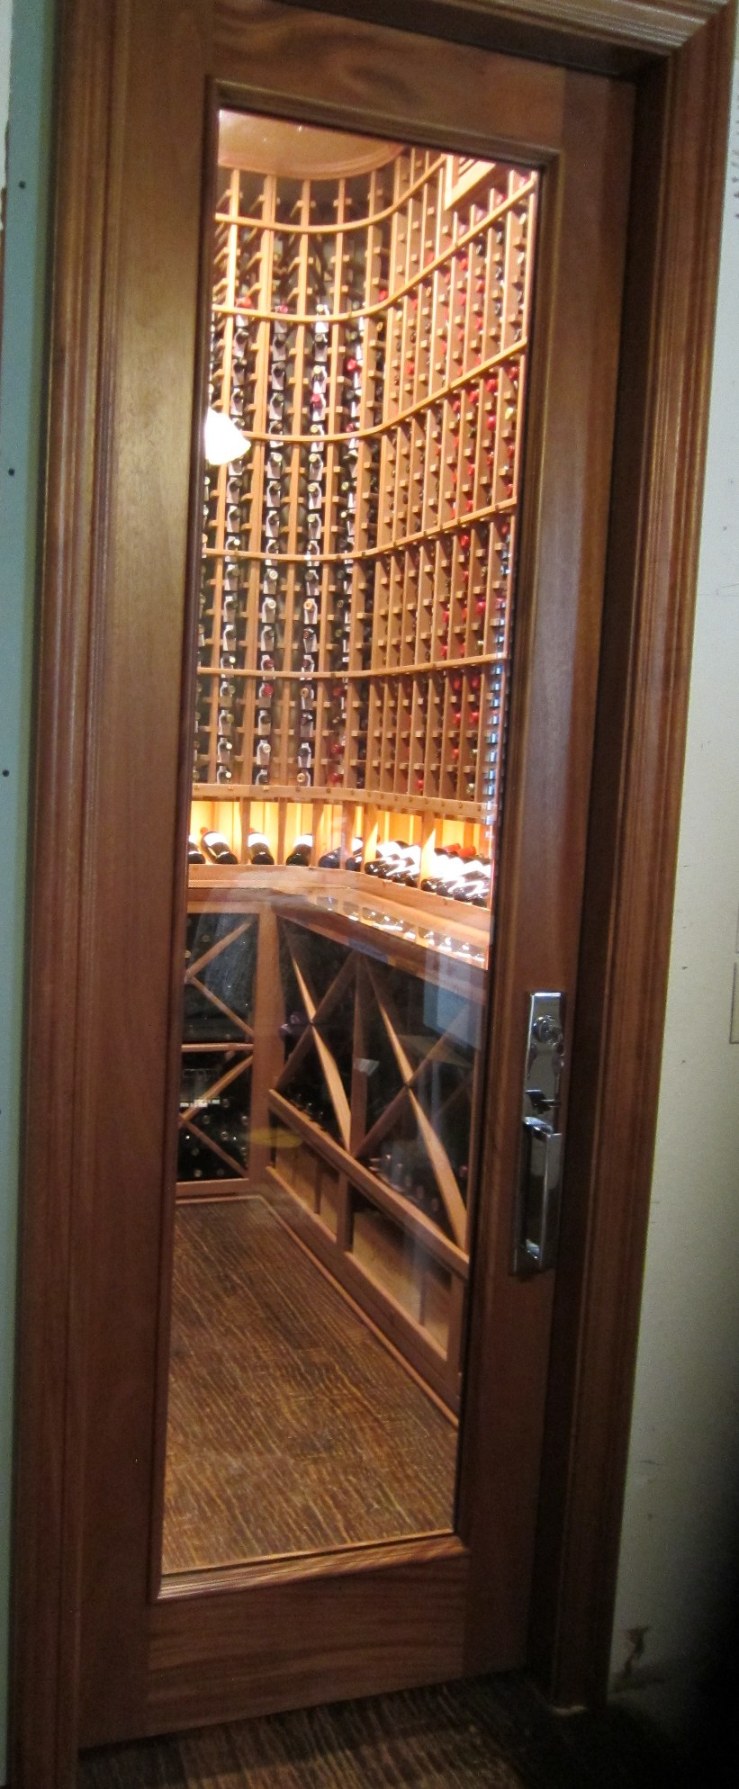 Barolo Glass Wine Cellar Door in Mahogany with Wheat Stain and Lacquer Designed by Orange County Master Builders